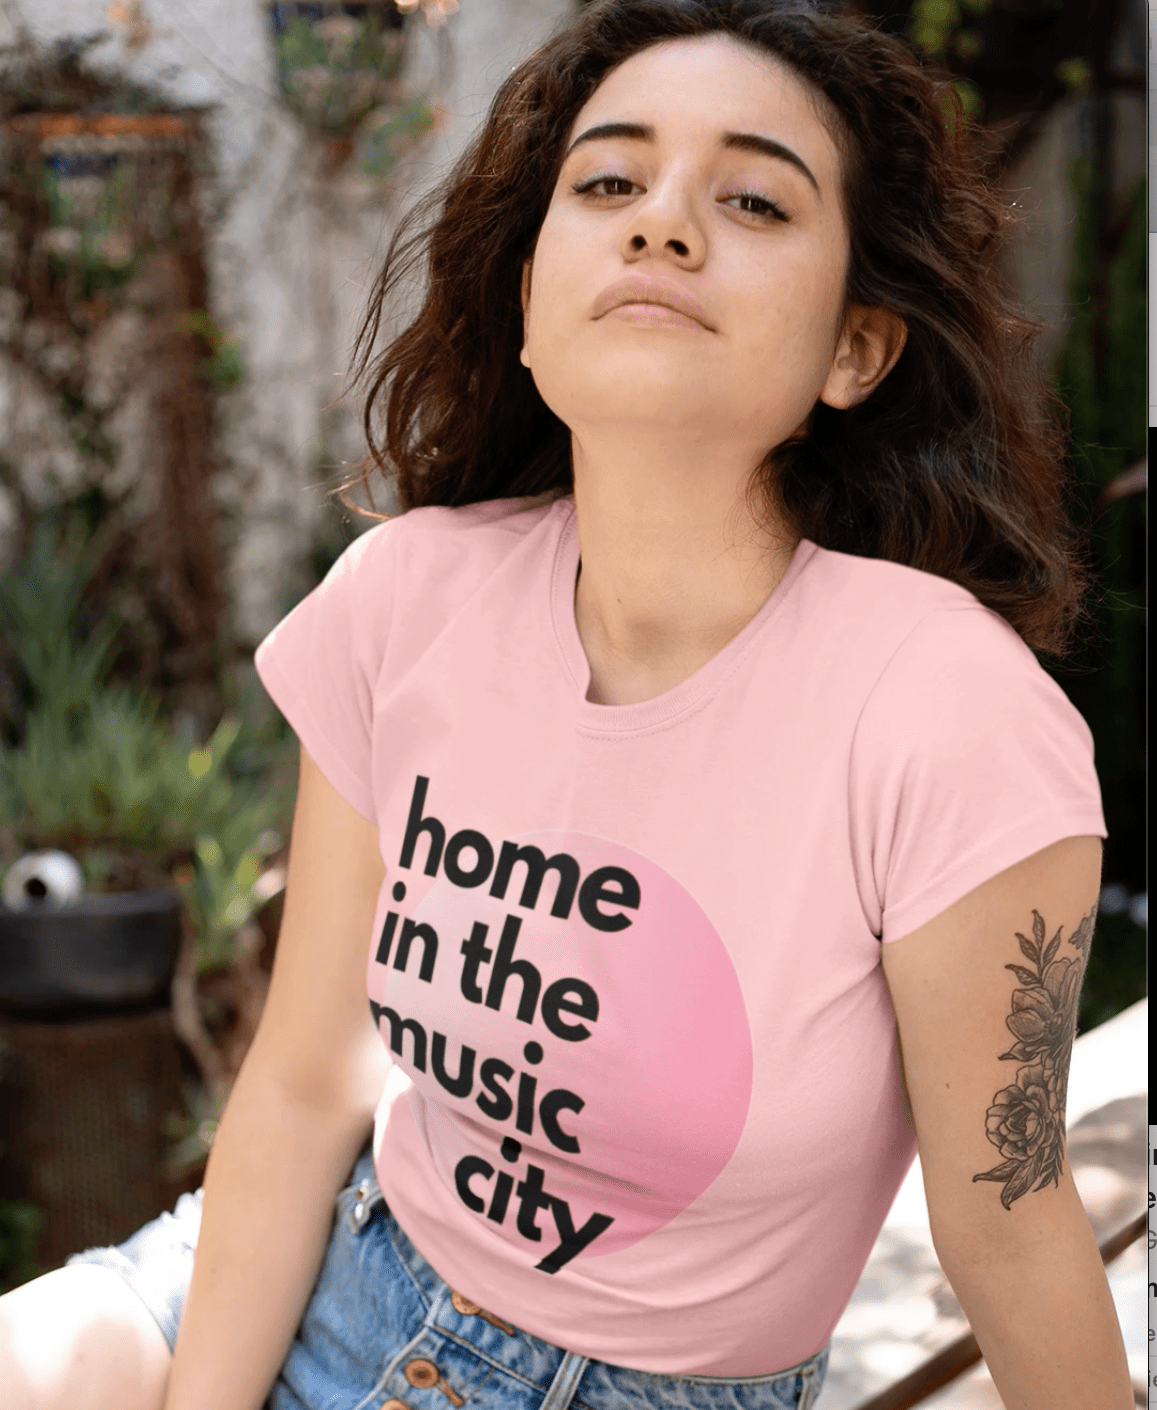 City Shirt Co home in the music city | Nashville t-shirt